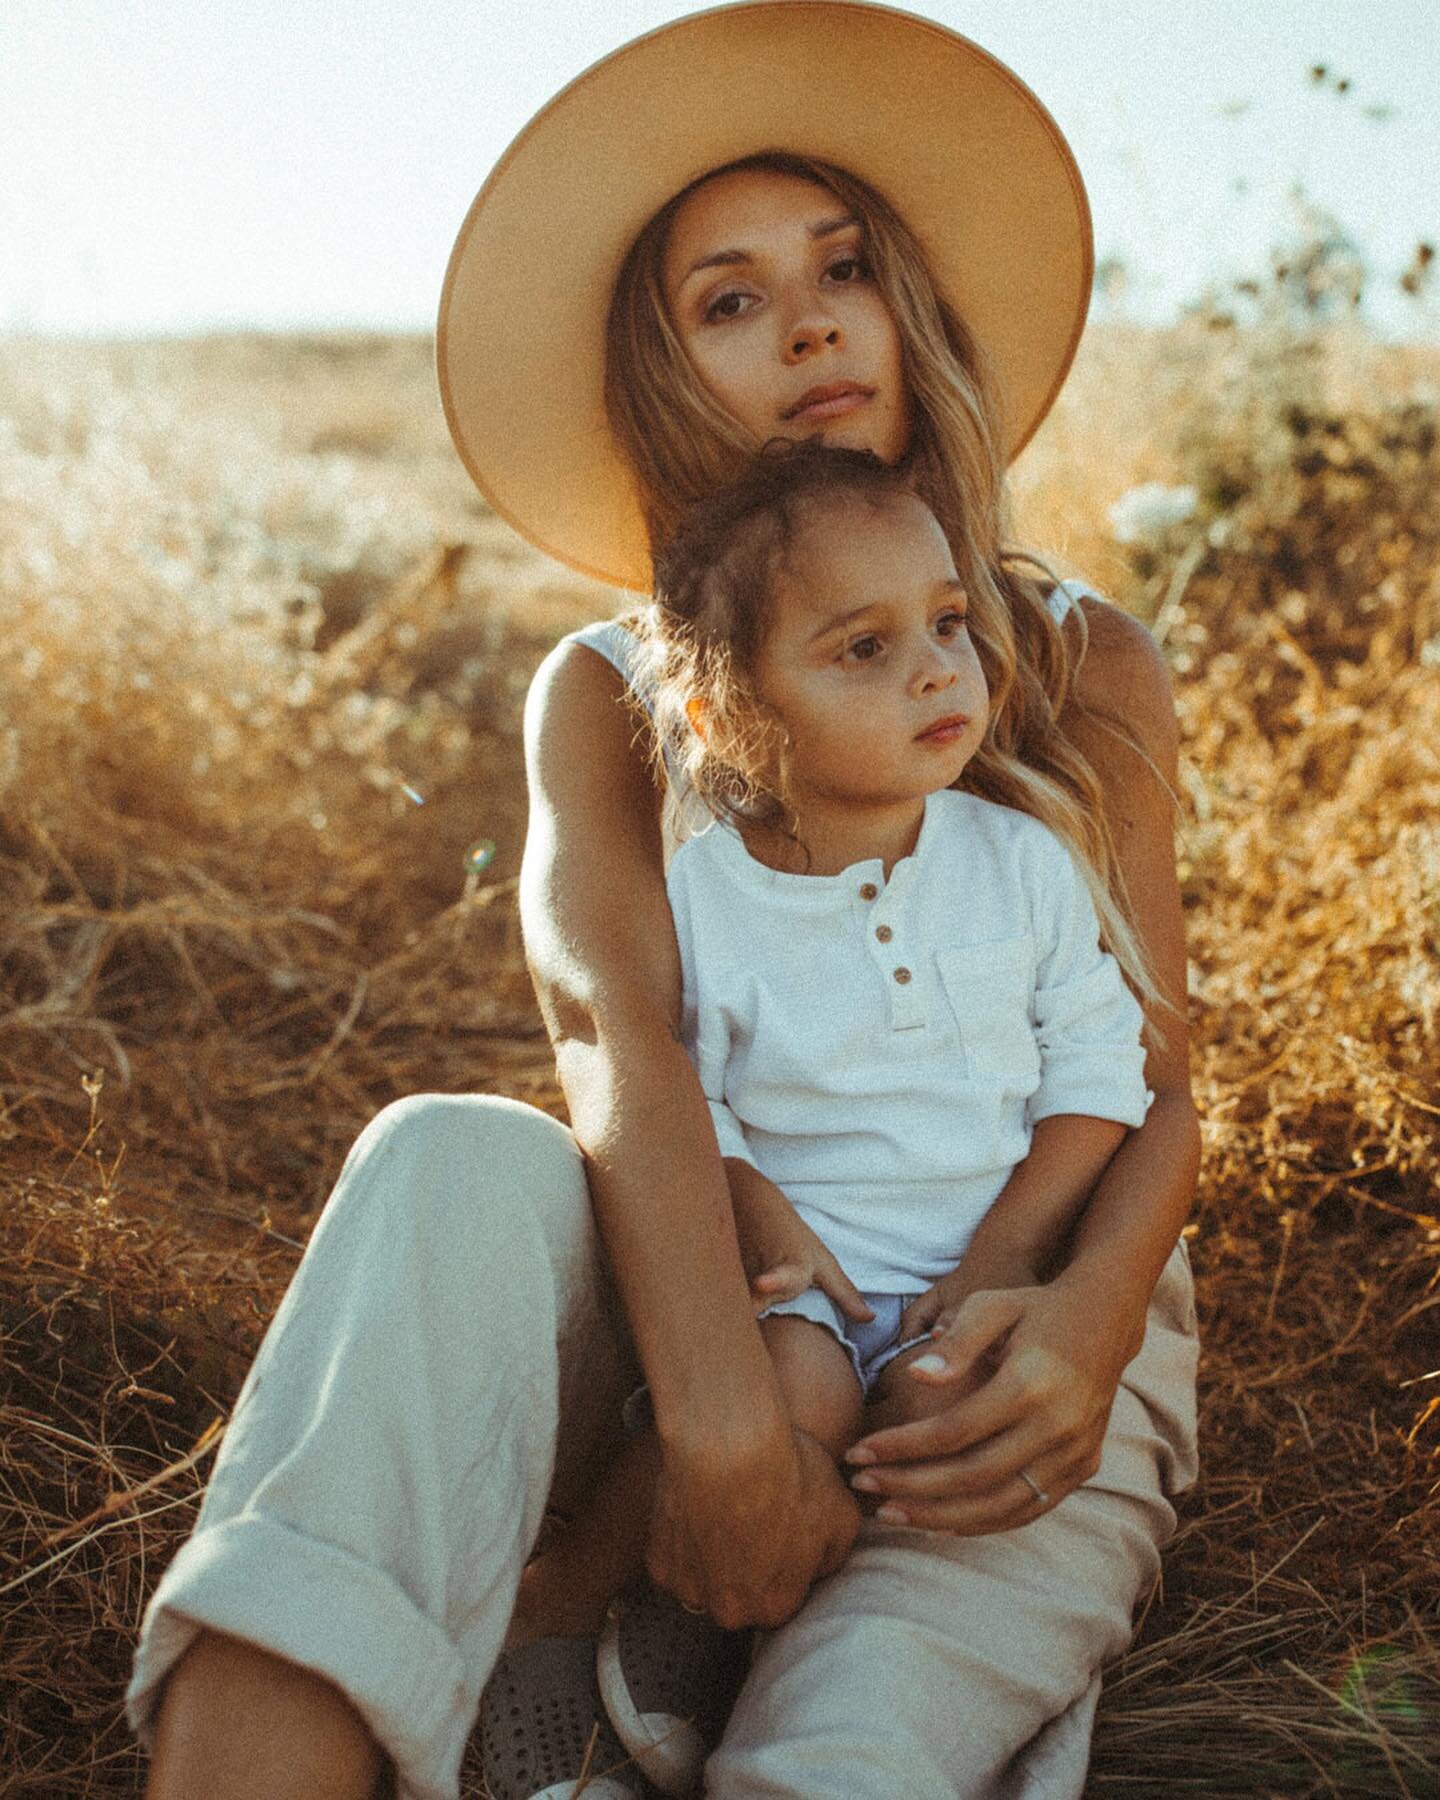 &ldquo;This right here, what we have, it&rsquo;s indescribable. So incredibly indescribable.&rdquo;
-Dancing + wandering around in sunkissed fields will always be a yes for me. Motherhood sessions at golden hour, YES PLEASE.
.
.
#goldenhourphotograph